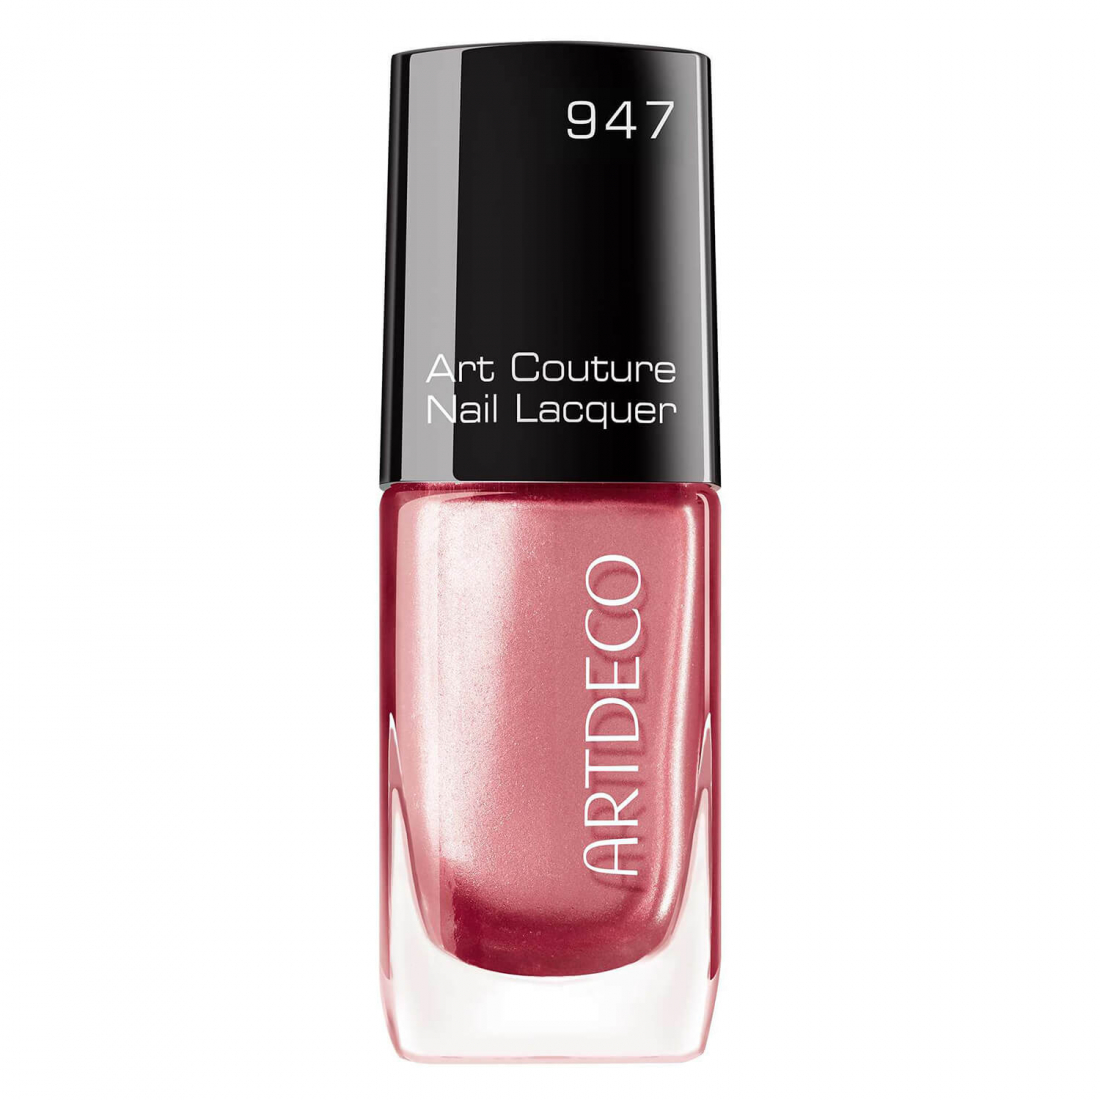 Vernis à ongles 'Art Couture' - 947 Pearl Enchanted 10 ml